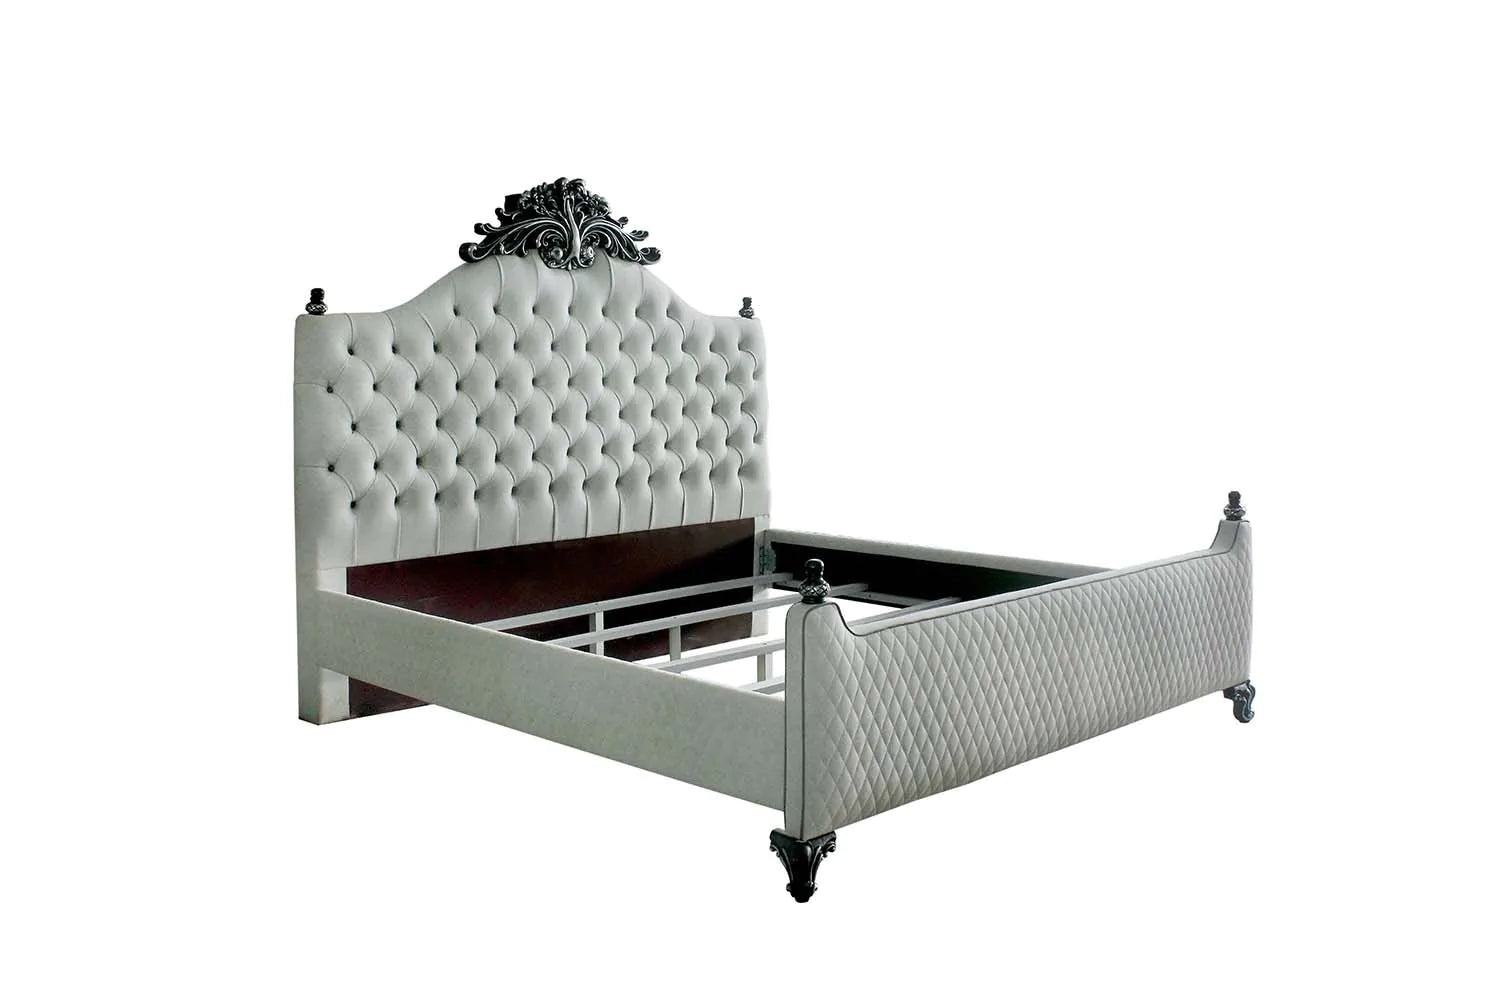 House Delphine Two Tone Ivory Fabric & Charcoal Finish Queen Bed Model 28850Q By ACME Furniture